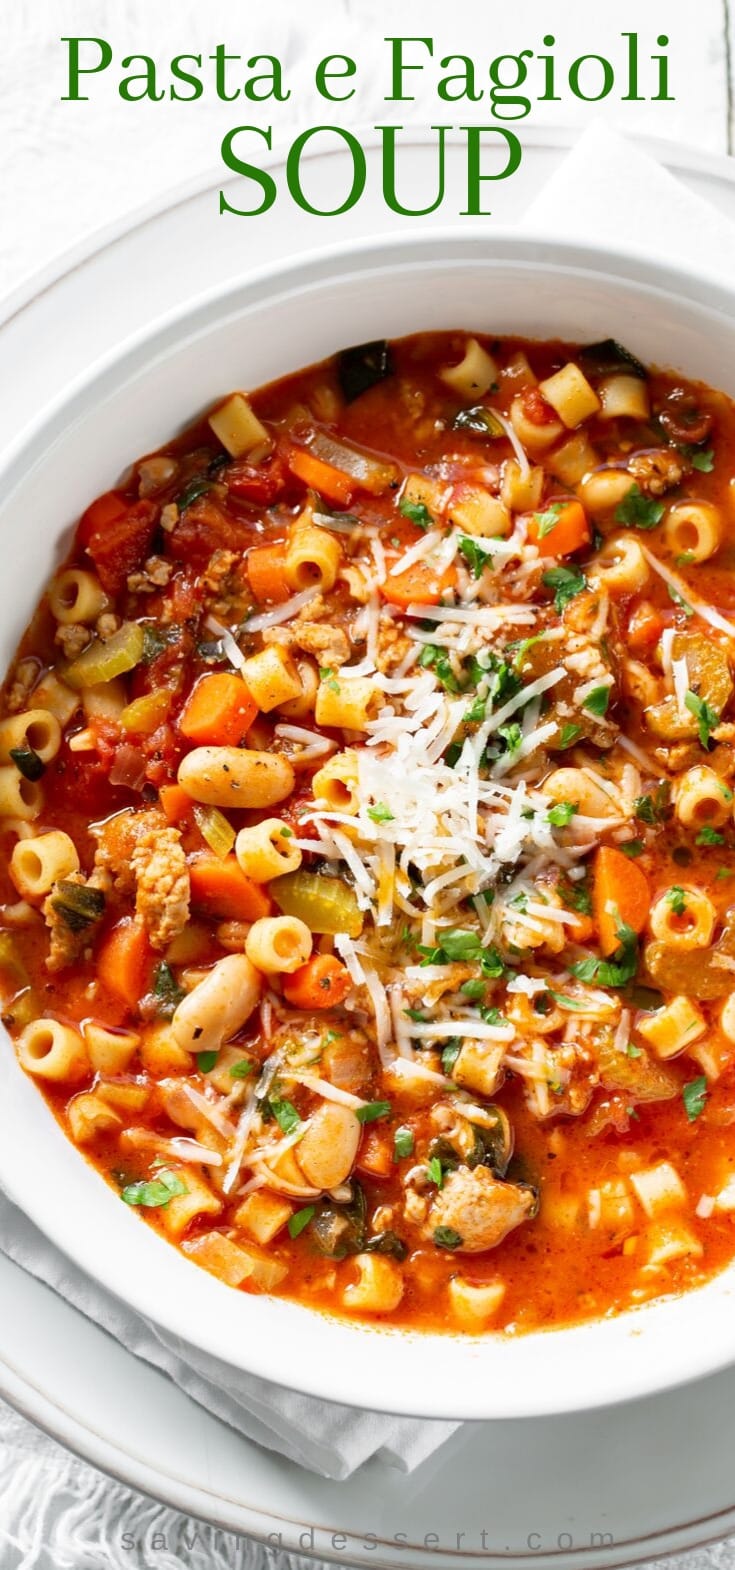 A big bowl of Pasta e Fagioli soup with Italian sausage and beans garnished with parsley and Parmesan